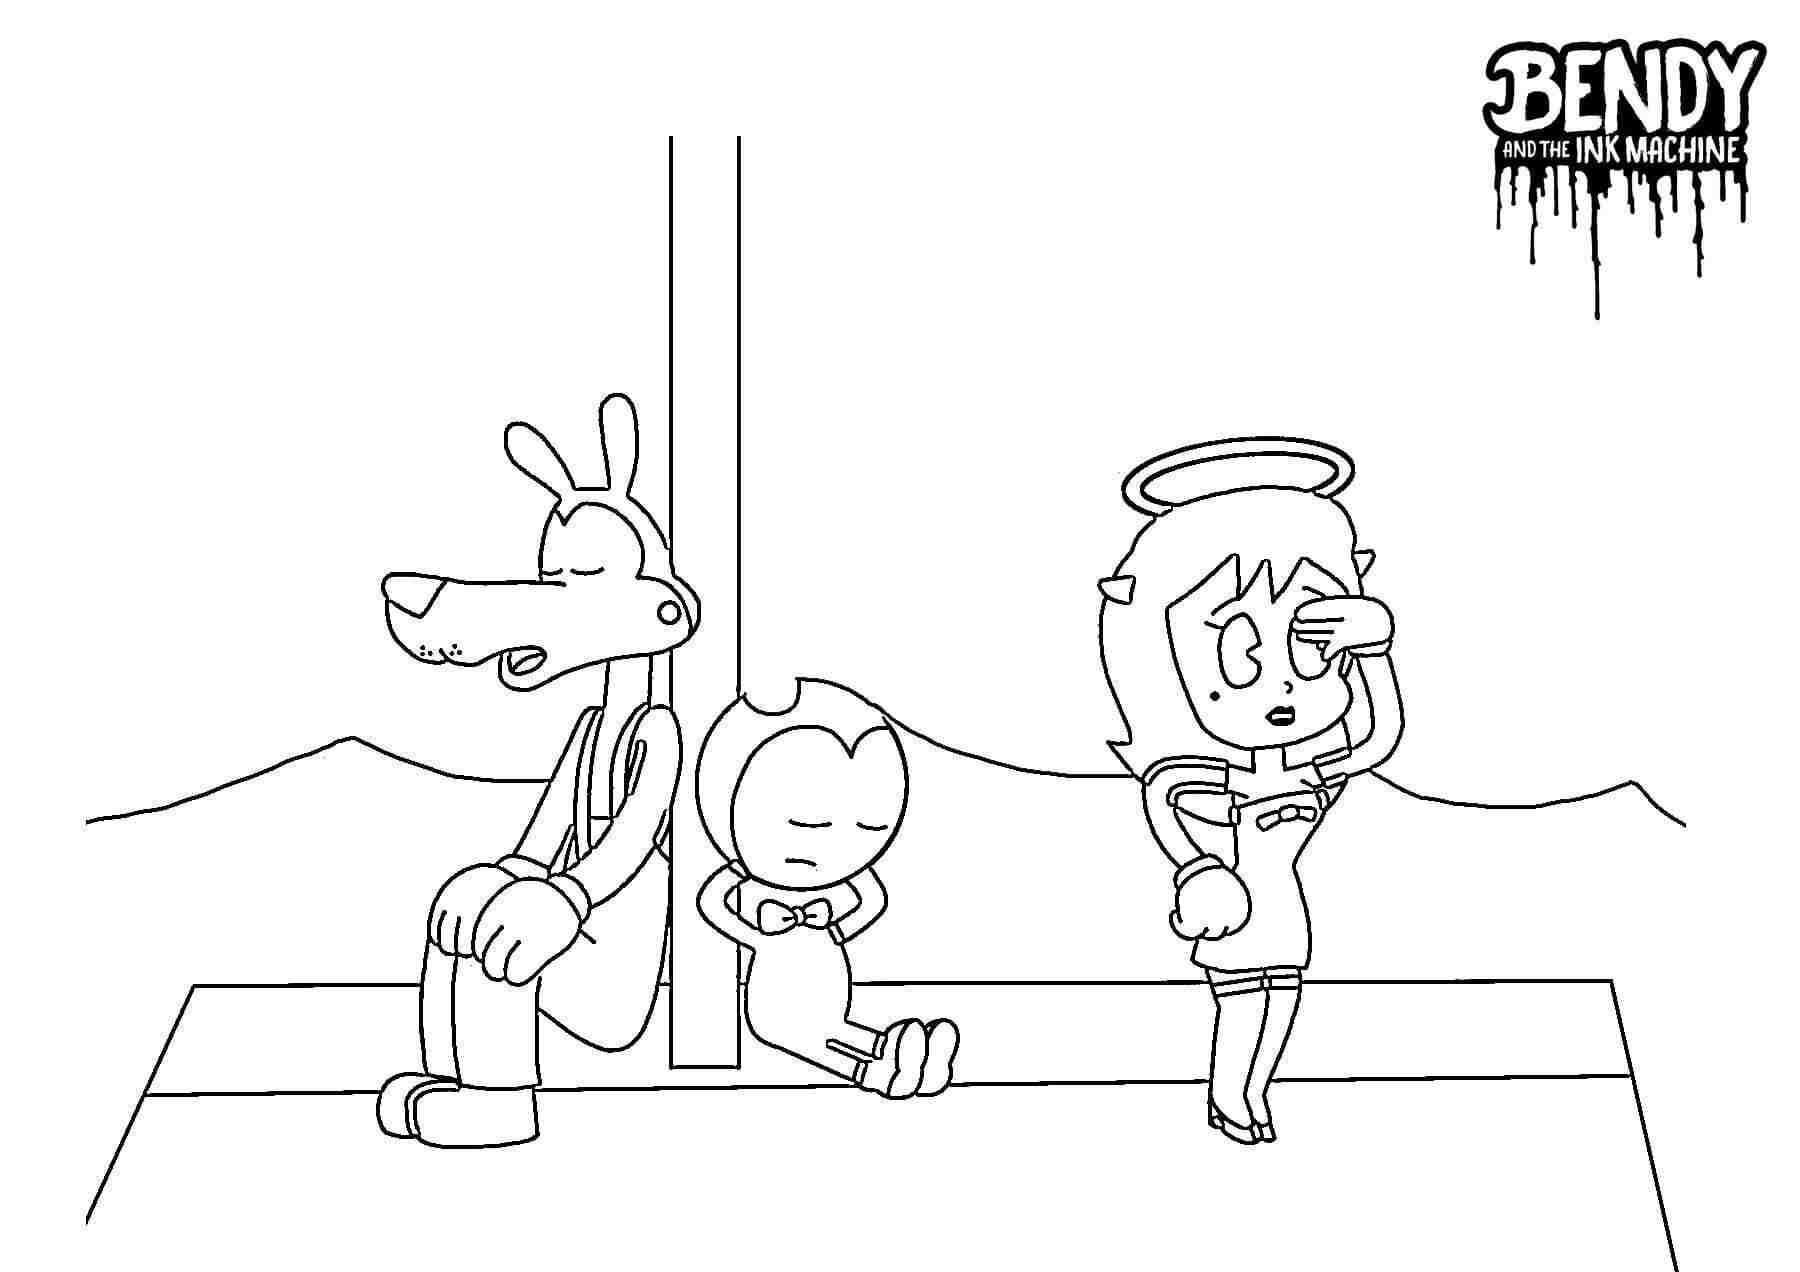 Boris the Wolf, Bendy and Alice Angle from Bendy and the Ink Machine Coloring Page